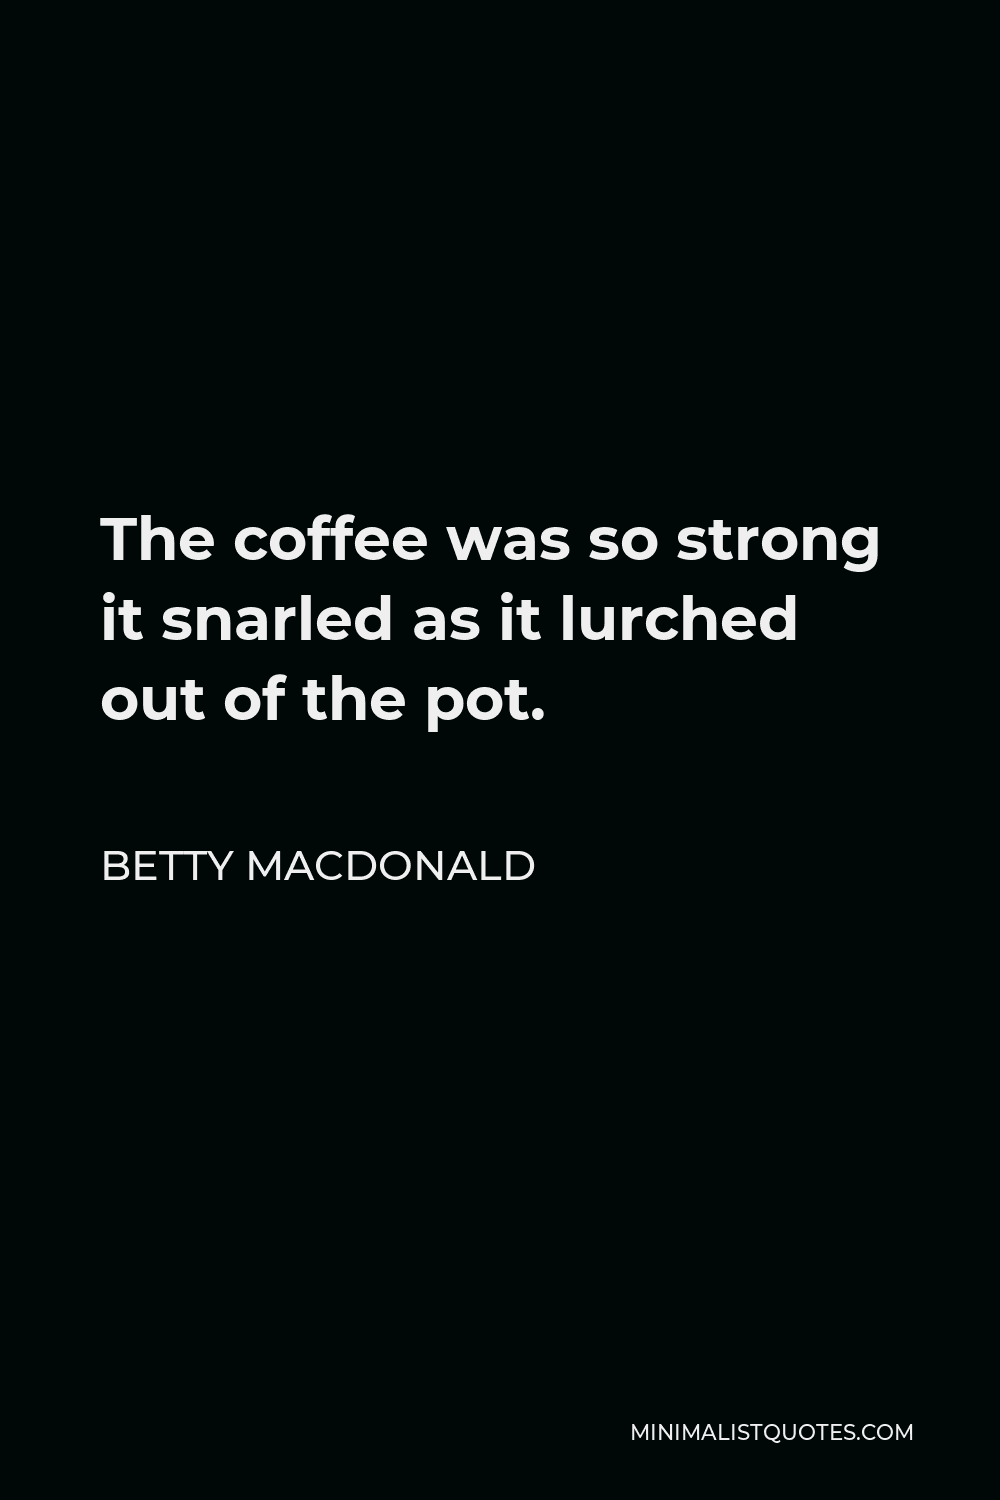 Betty MacDonald Quote - The coffee was so strong it snarled as it lurched out of the pot.